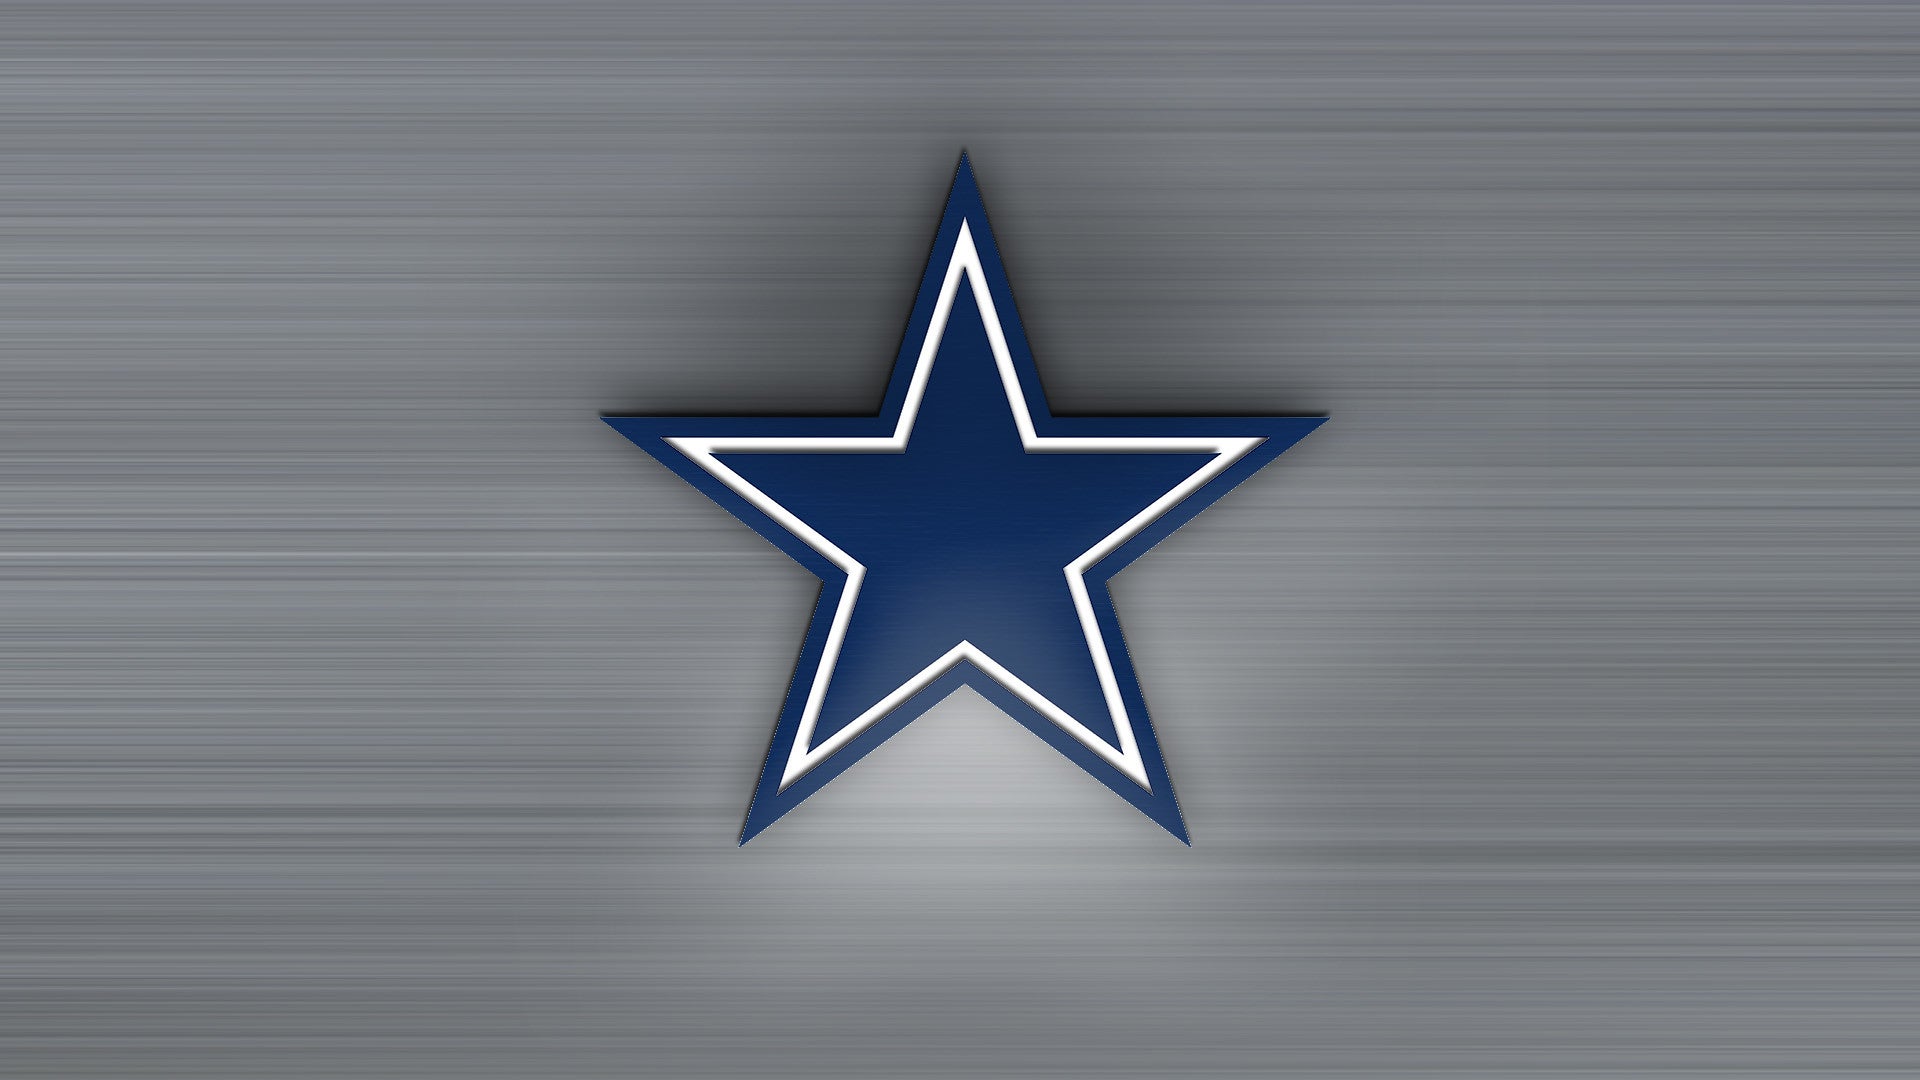 Dallas Cowboys Sign Partnership With Blockchain.com: What The Deal Means,  Why It's Important For The NFL - Live Nation Entertainment (NYSE:LYV) -  Benzinga